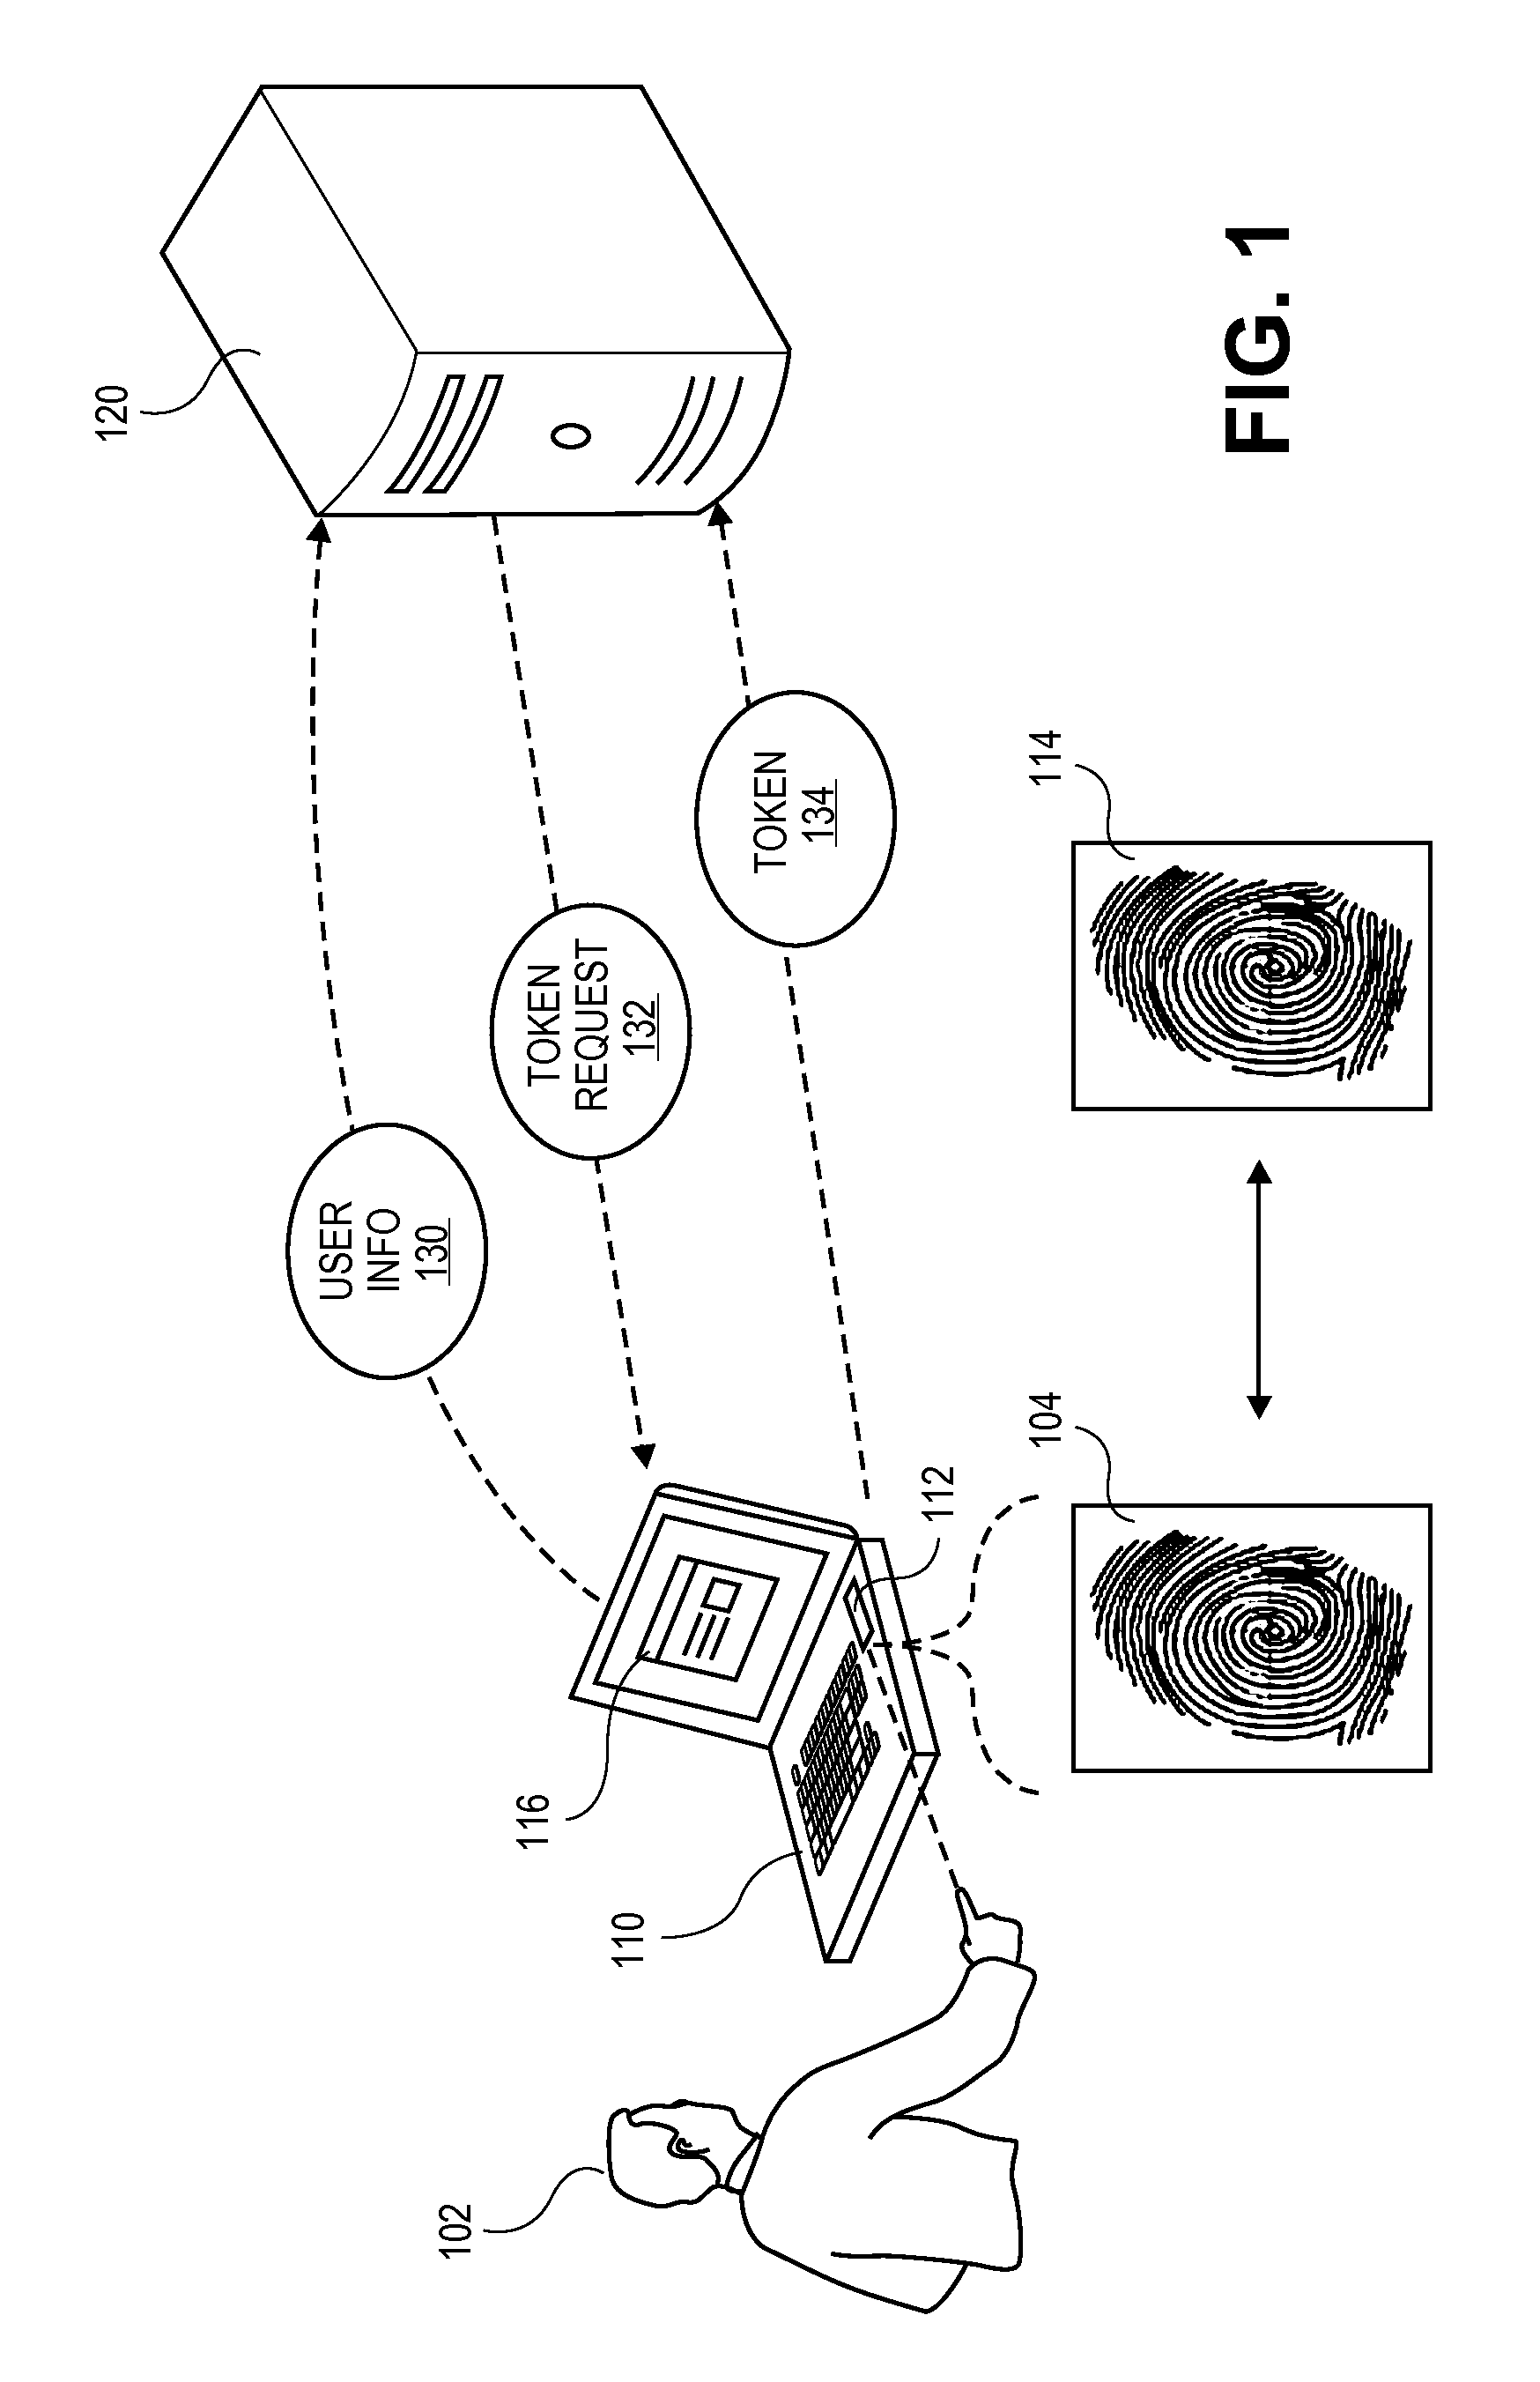 Fingerprint Sensor Device and System with Verification Token and Methods of Using